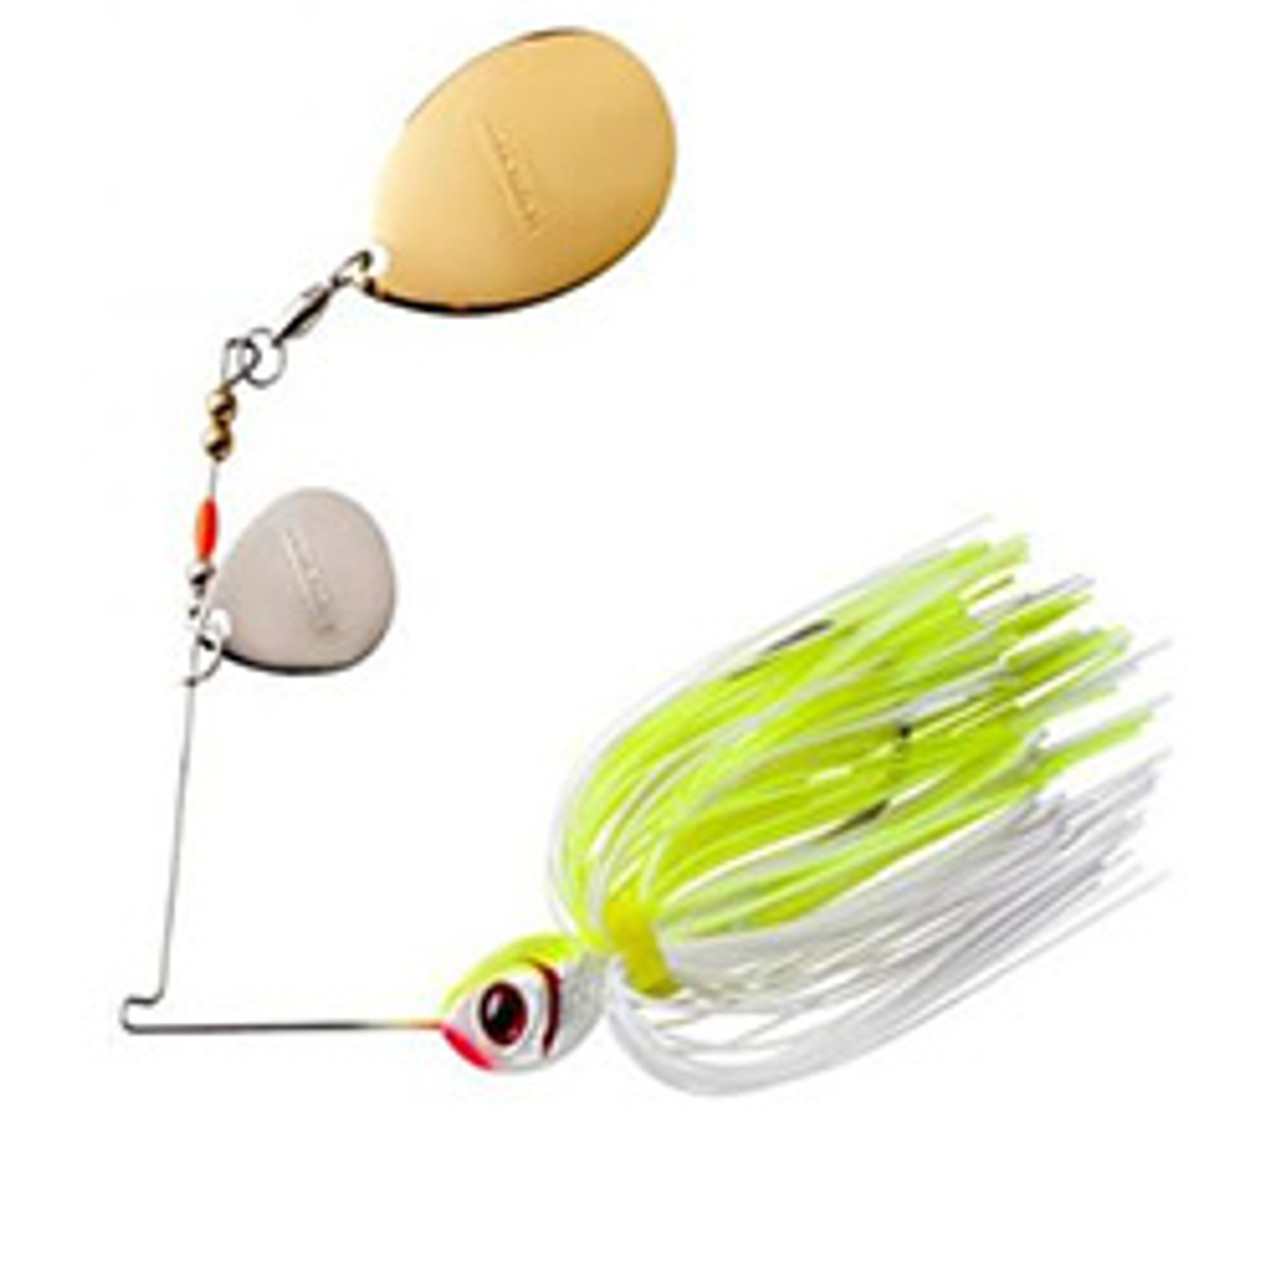 Colorado Indiana Blade 3/8 oz Spinnerbait by Booyah Bait Co.